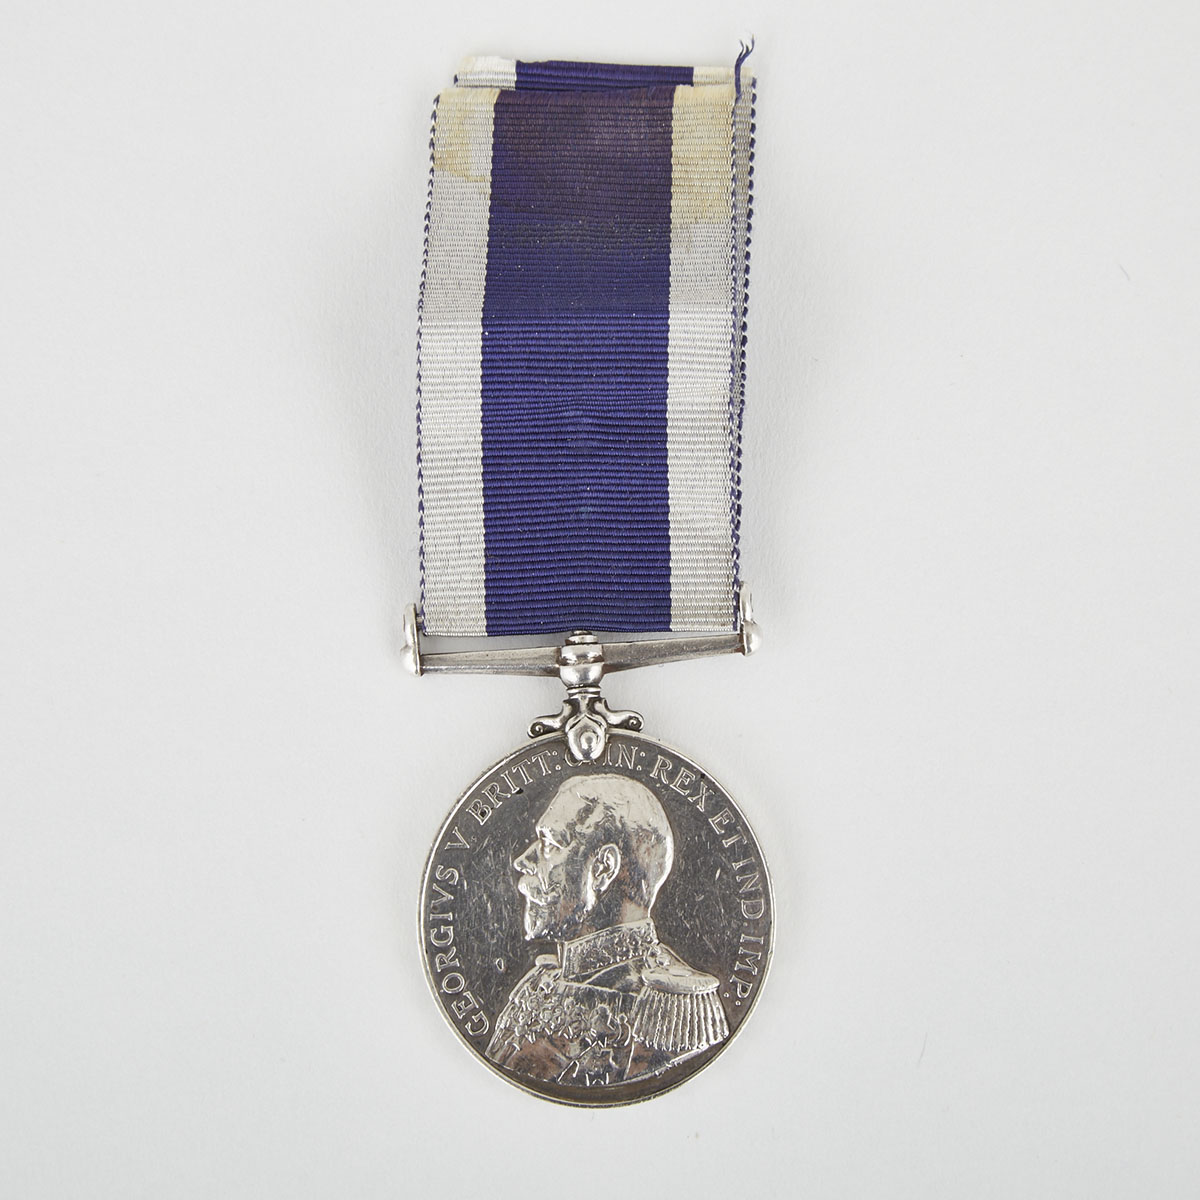 George V Long Service and Good Conduct Medal to Leading Signalman Harry William Newton, 222696, H.M.S. Apollo